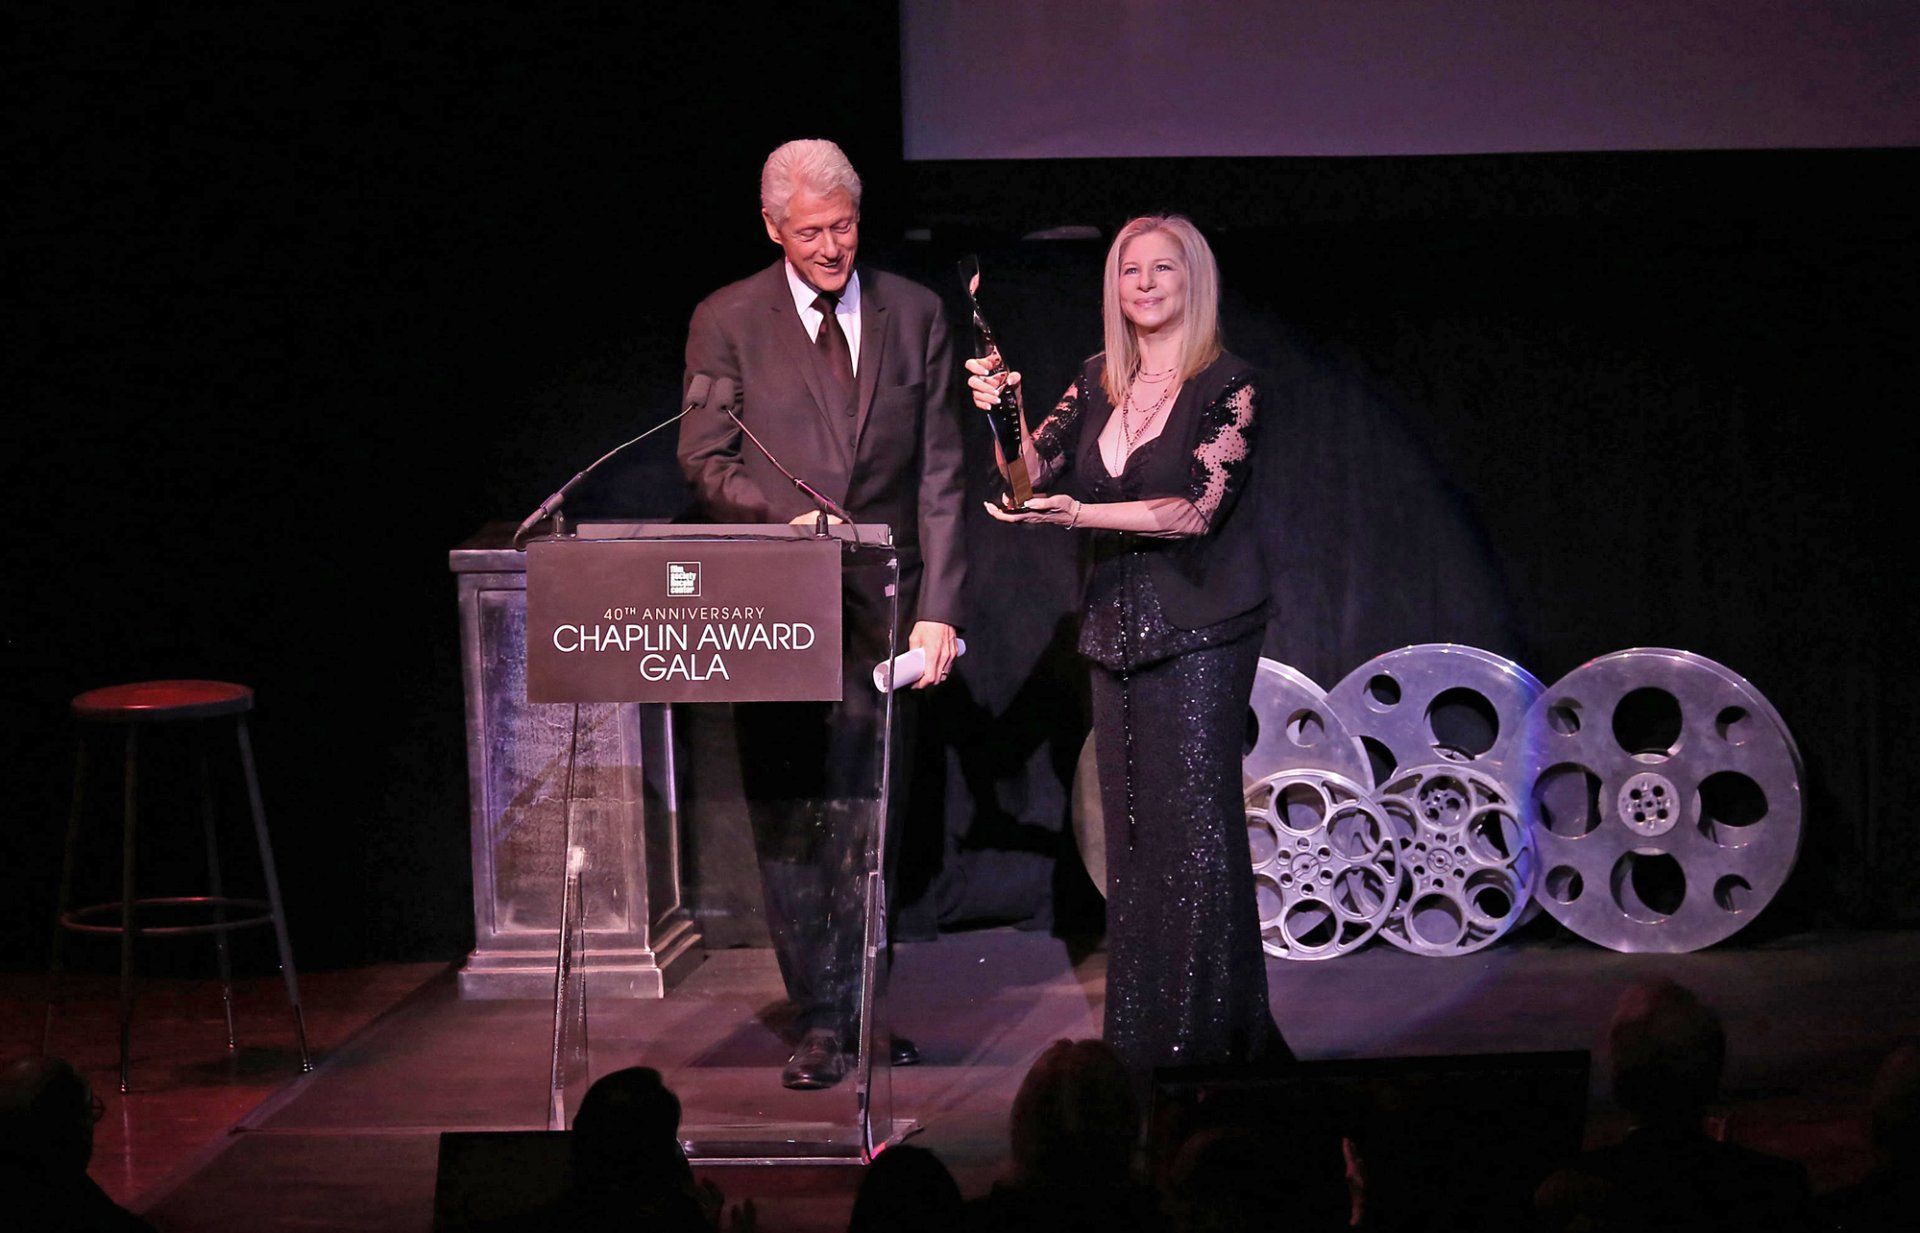 Bill Clinton & Barbra Streisand during the Presentation for the 40th Annual Chaplin Award Gala Honoring Barbra Streisand at Avery Fisher Hall in New York City on 4/22/2013.